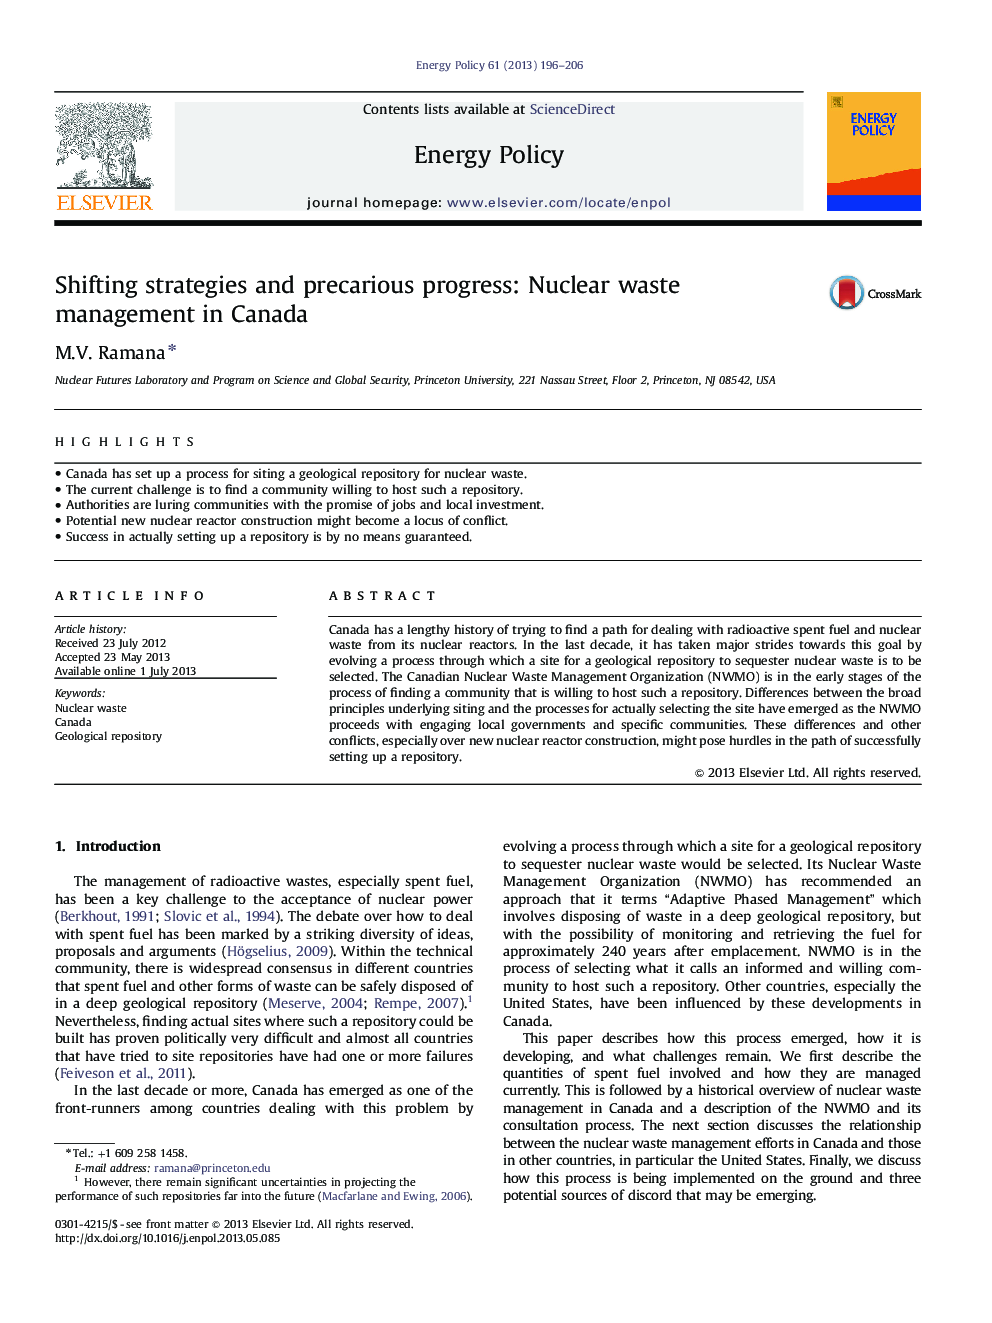 Shifting strategies and precarious progress: Nuclear waste management in Canada